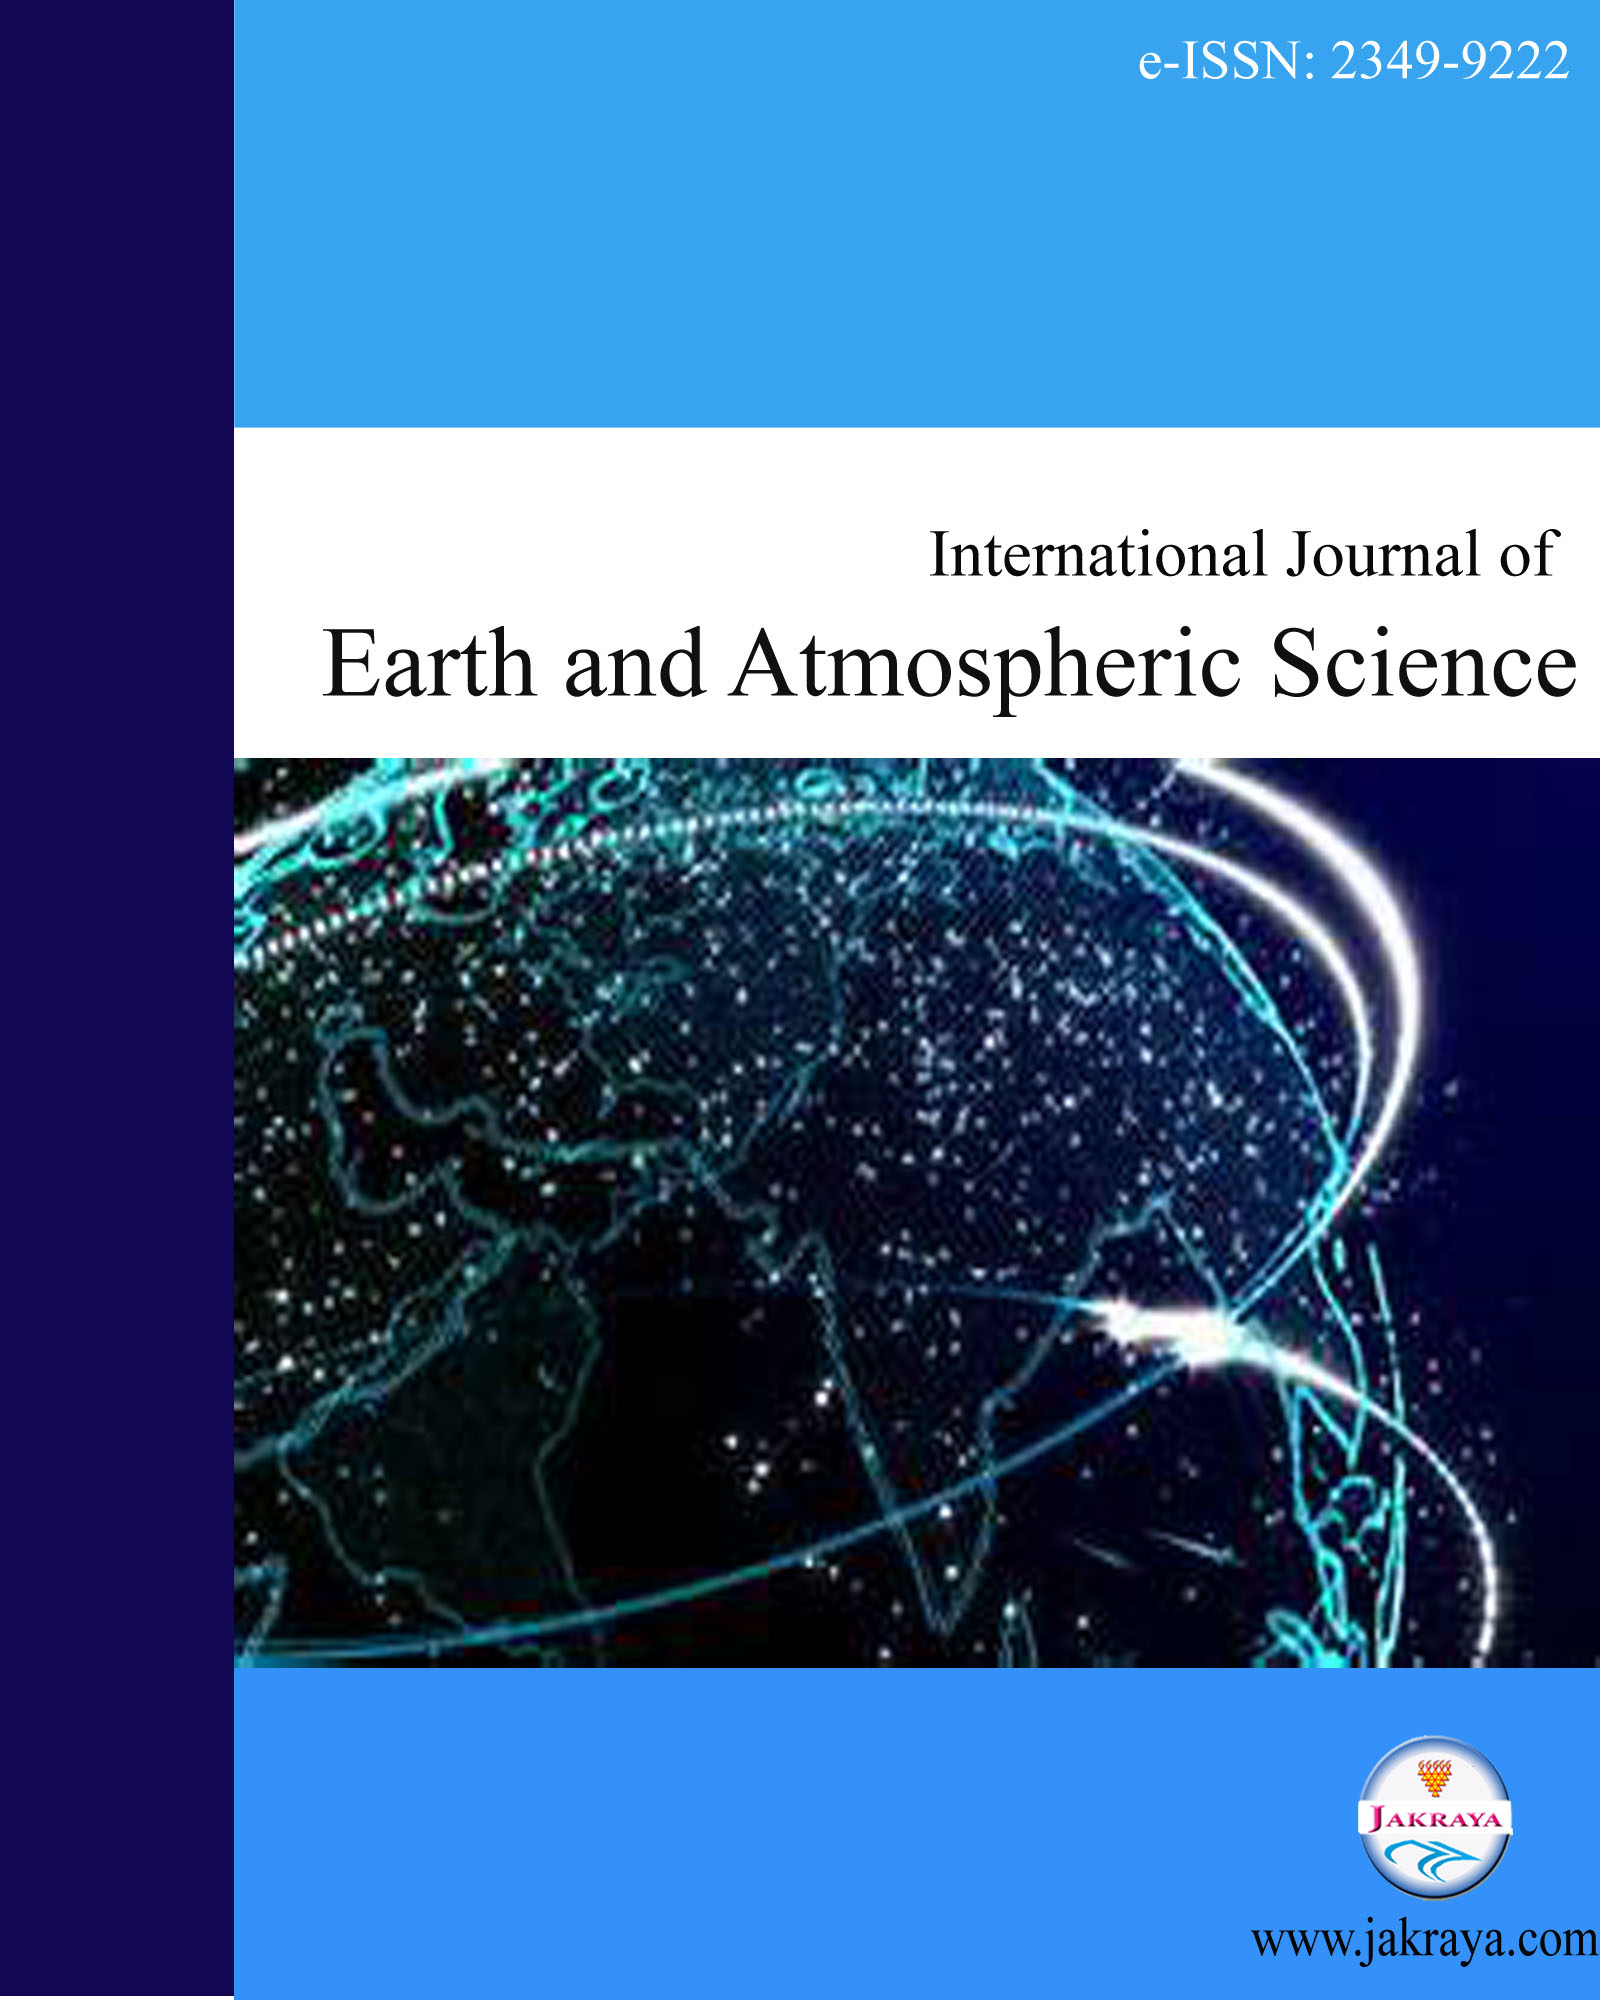 International Journal of Earth and Atmospheric Sciences